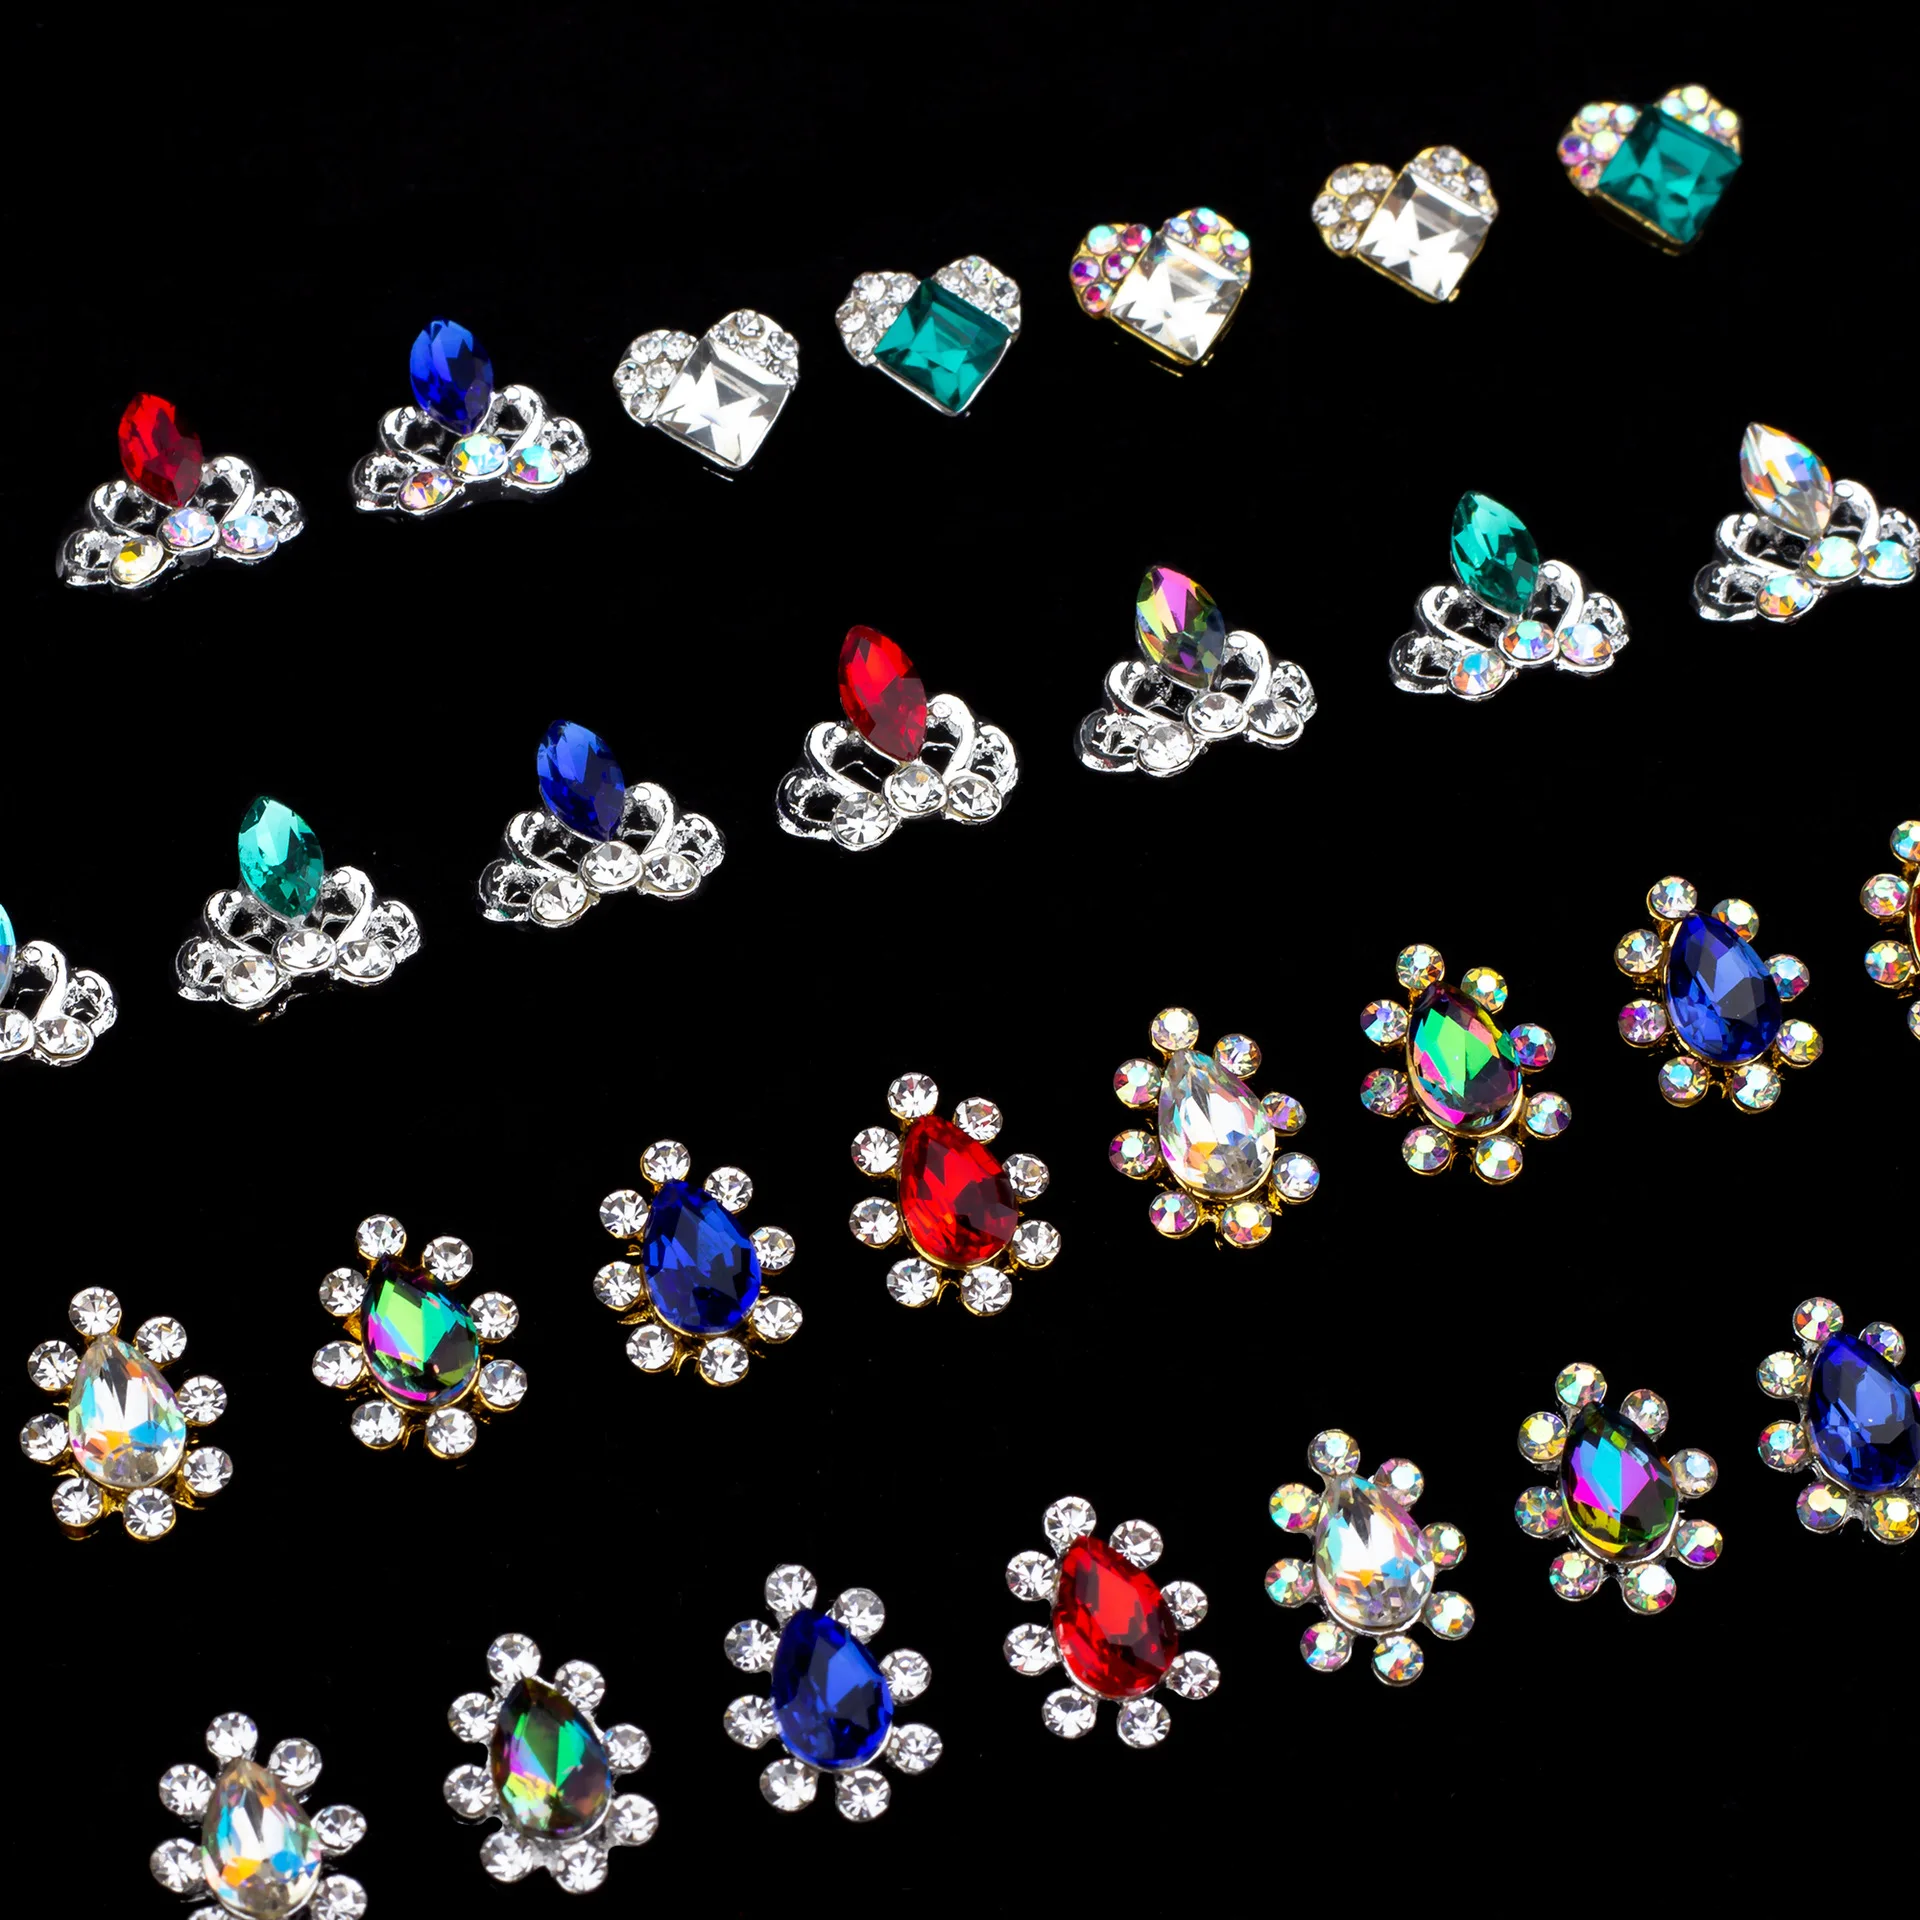 100Pcs Royal Crown Shiny Nail Art Rhinestones Crystal Romantic Design 3D Charms Crown/Heart/Snow Jewelry For Nails Accessories enlarge